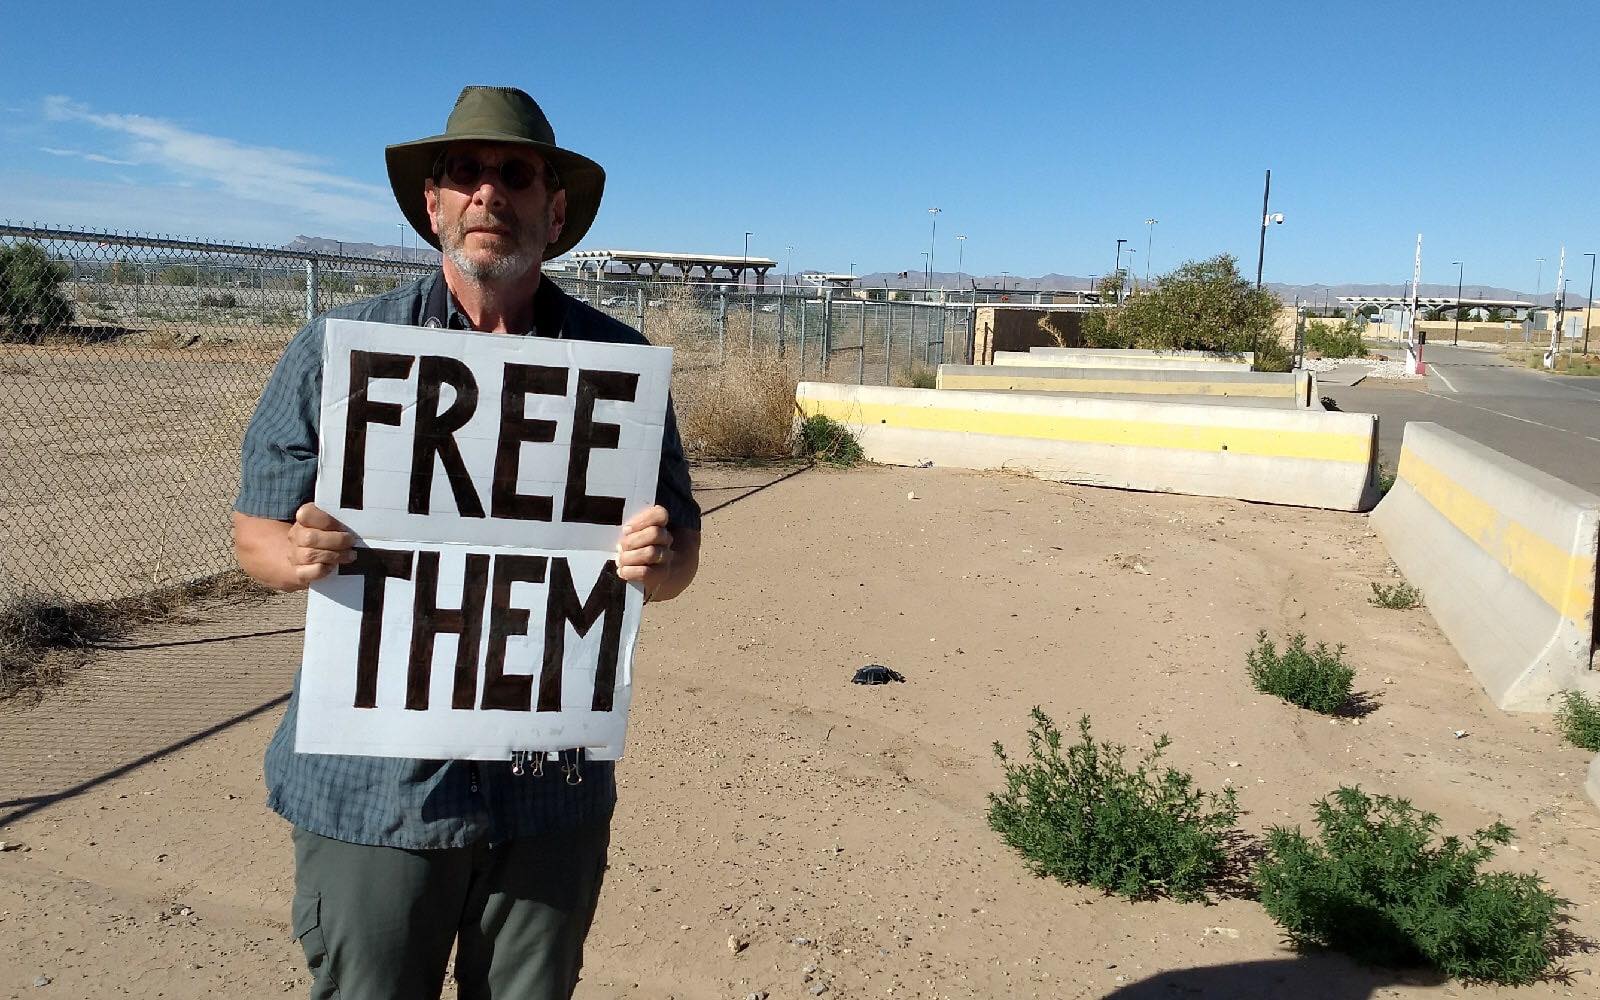 A Brooklyn resident for the past 2 months having a solitary protest on the border with Mexico